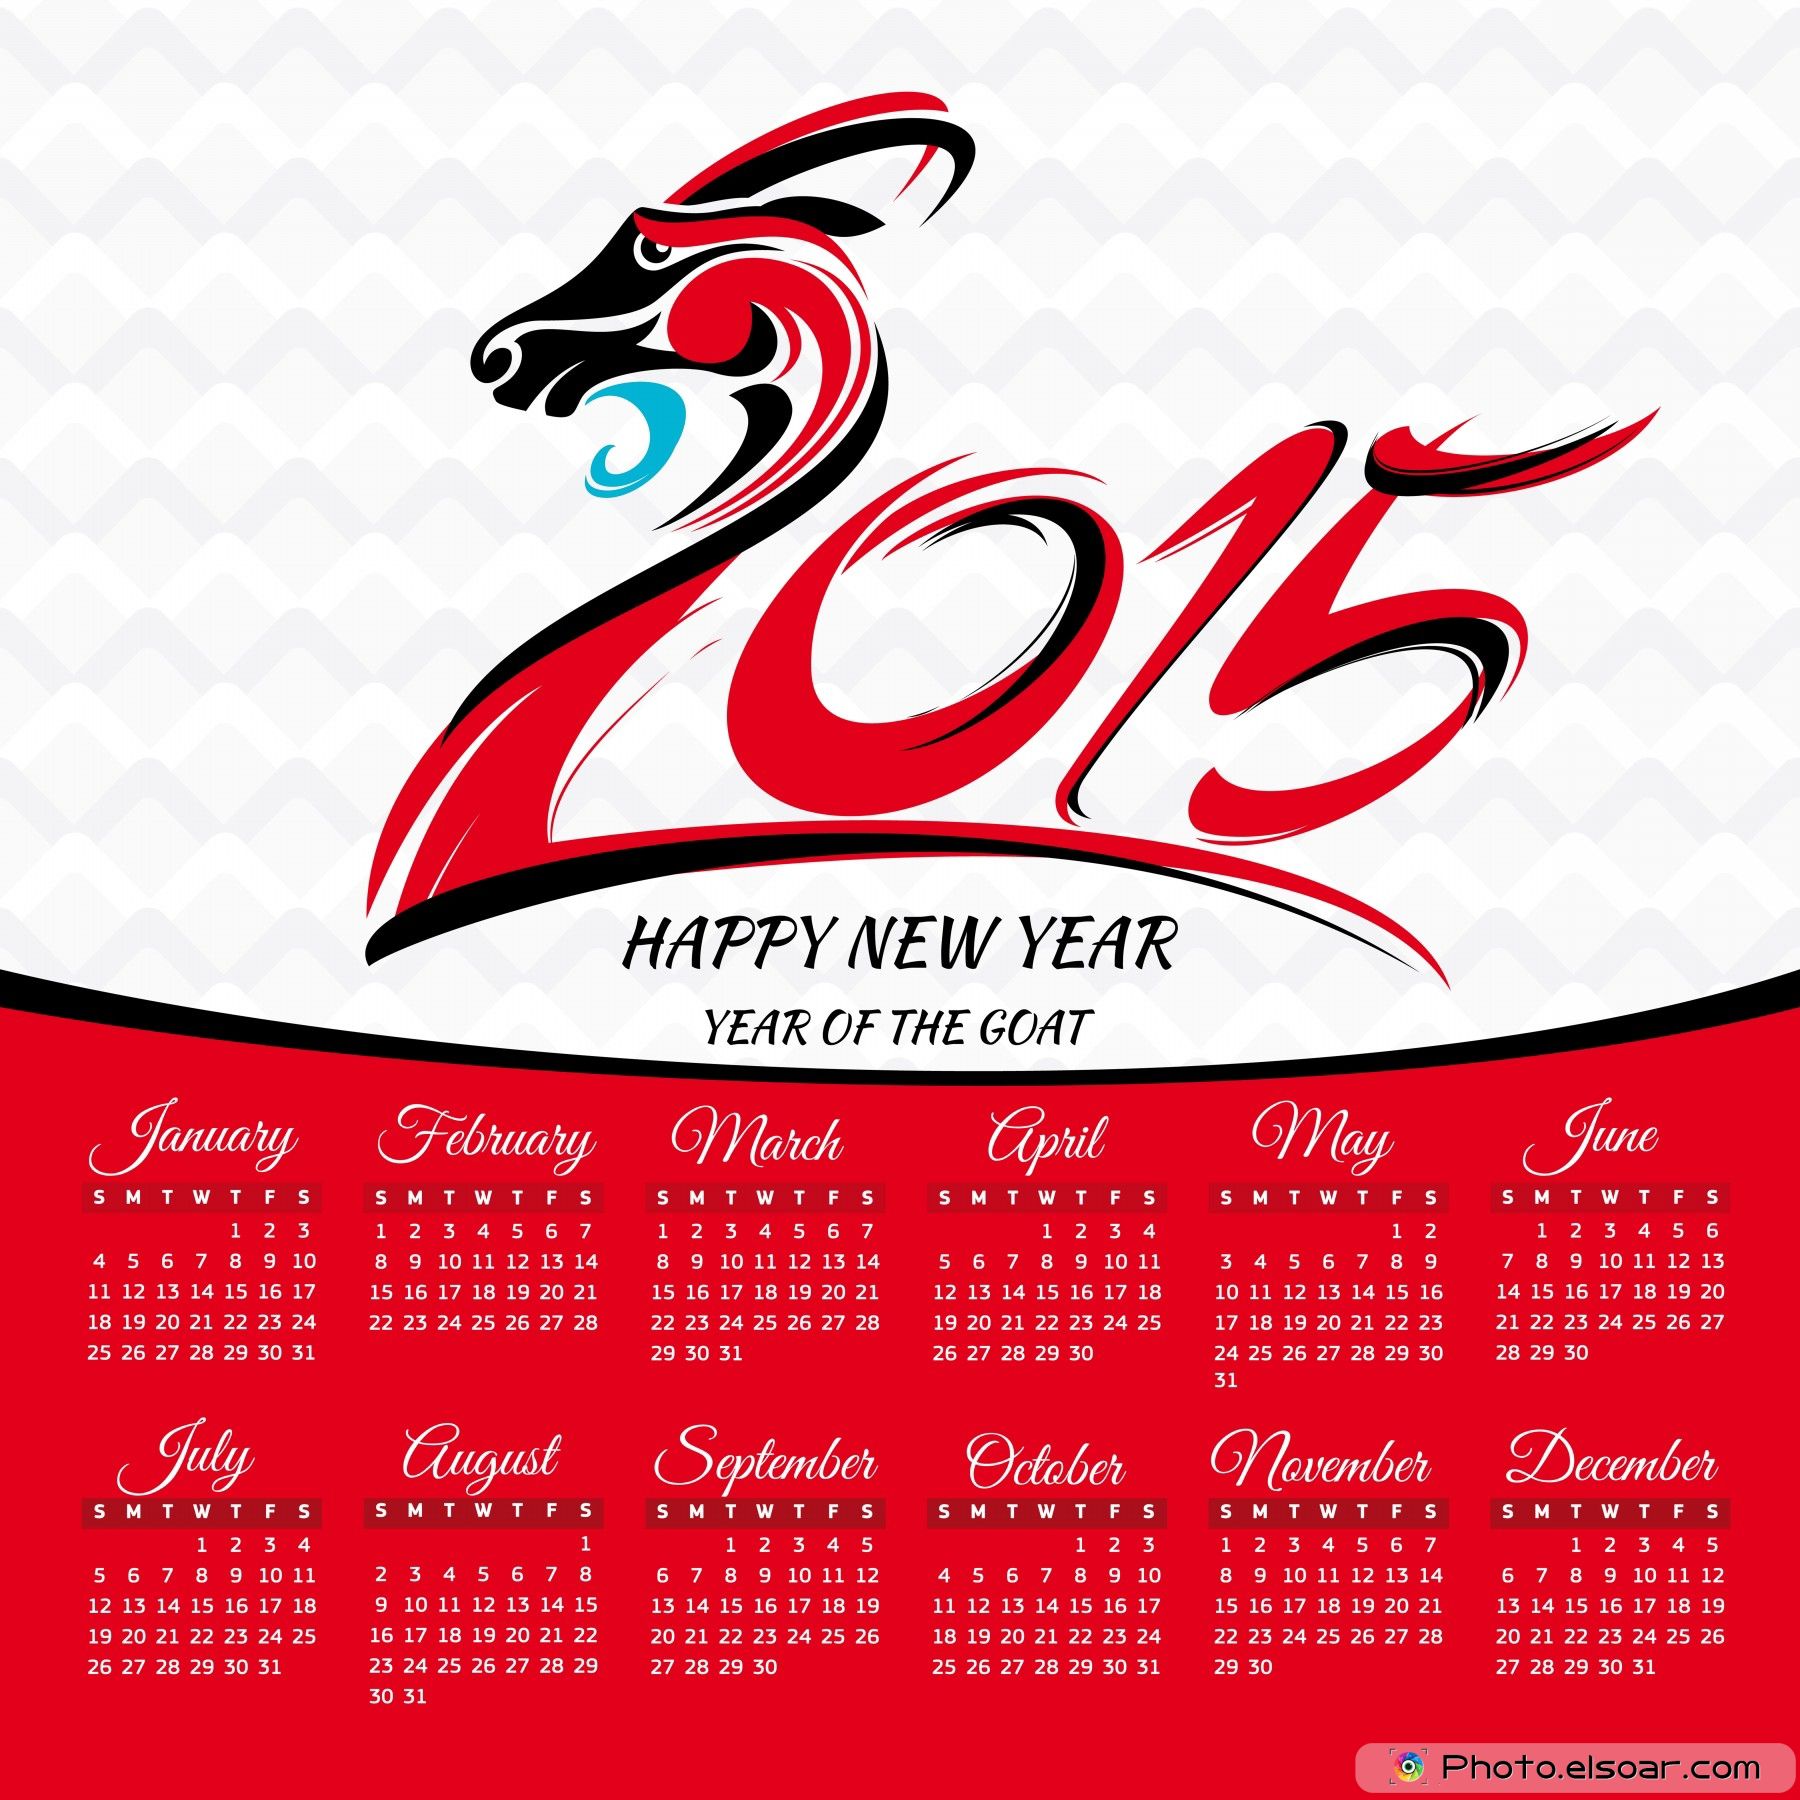 Year-Of-The-Goat-2015-Calendar